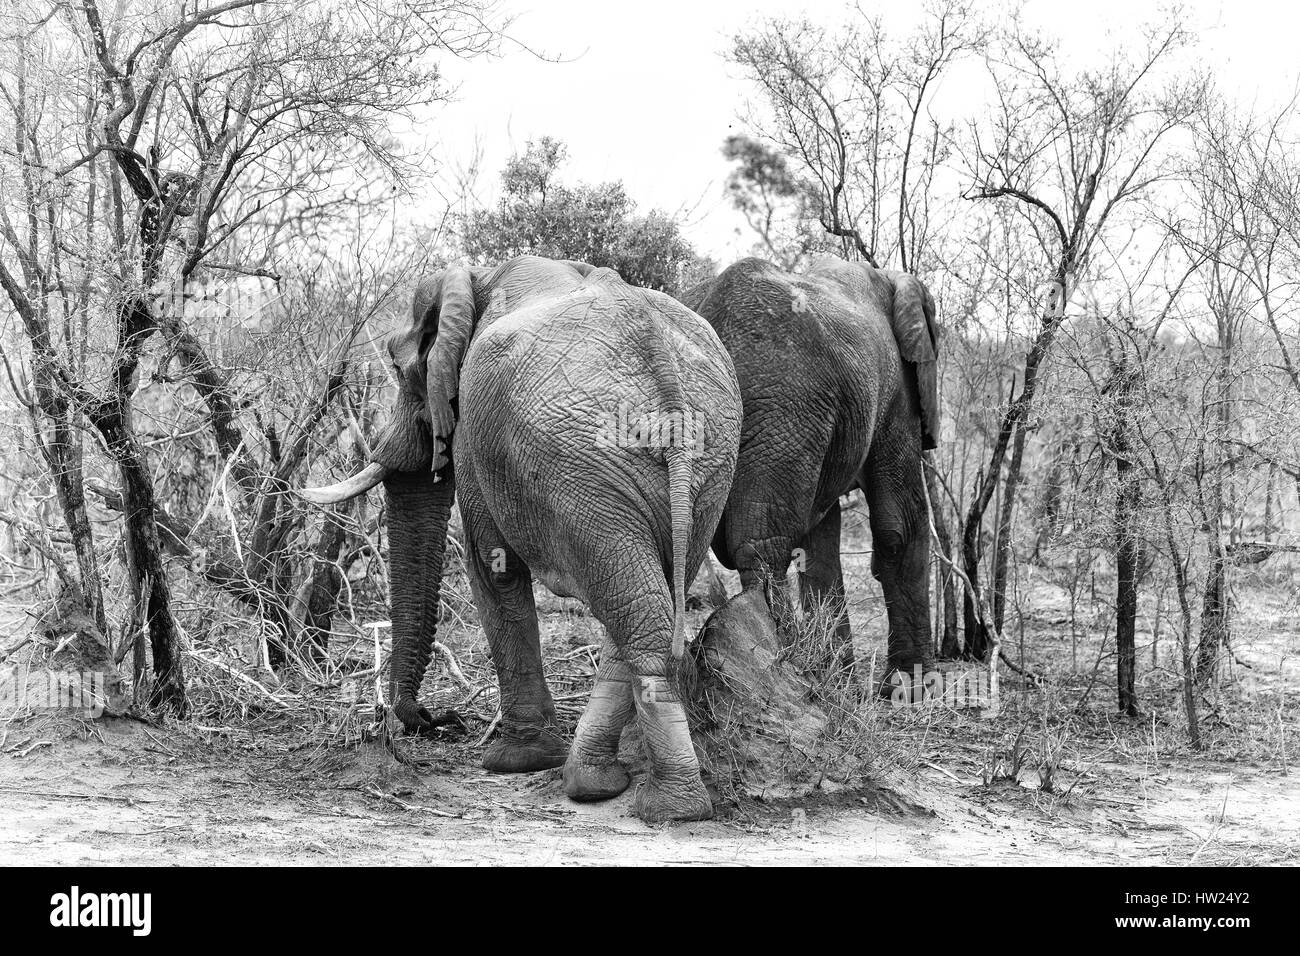 Two elephants in the bush. High contrast black and white image of a pair of African elephants in Kruger National park, South Africa. Stock Photo